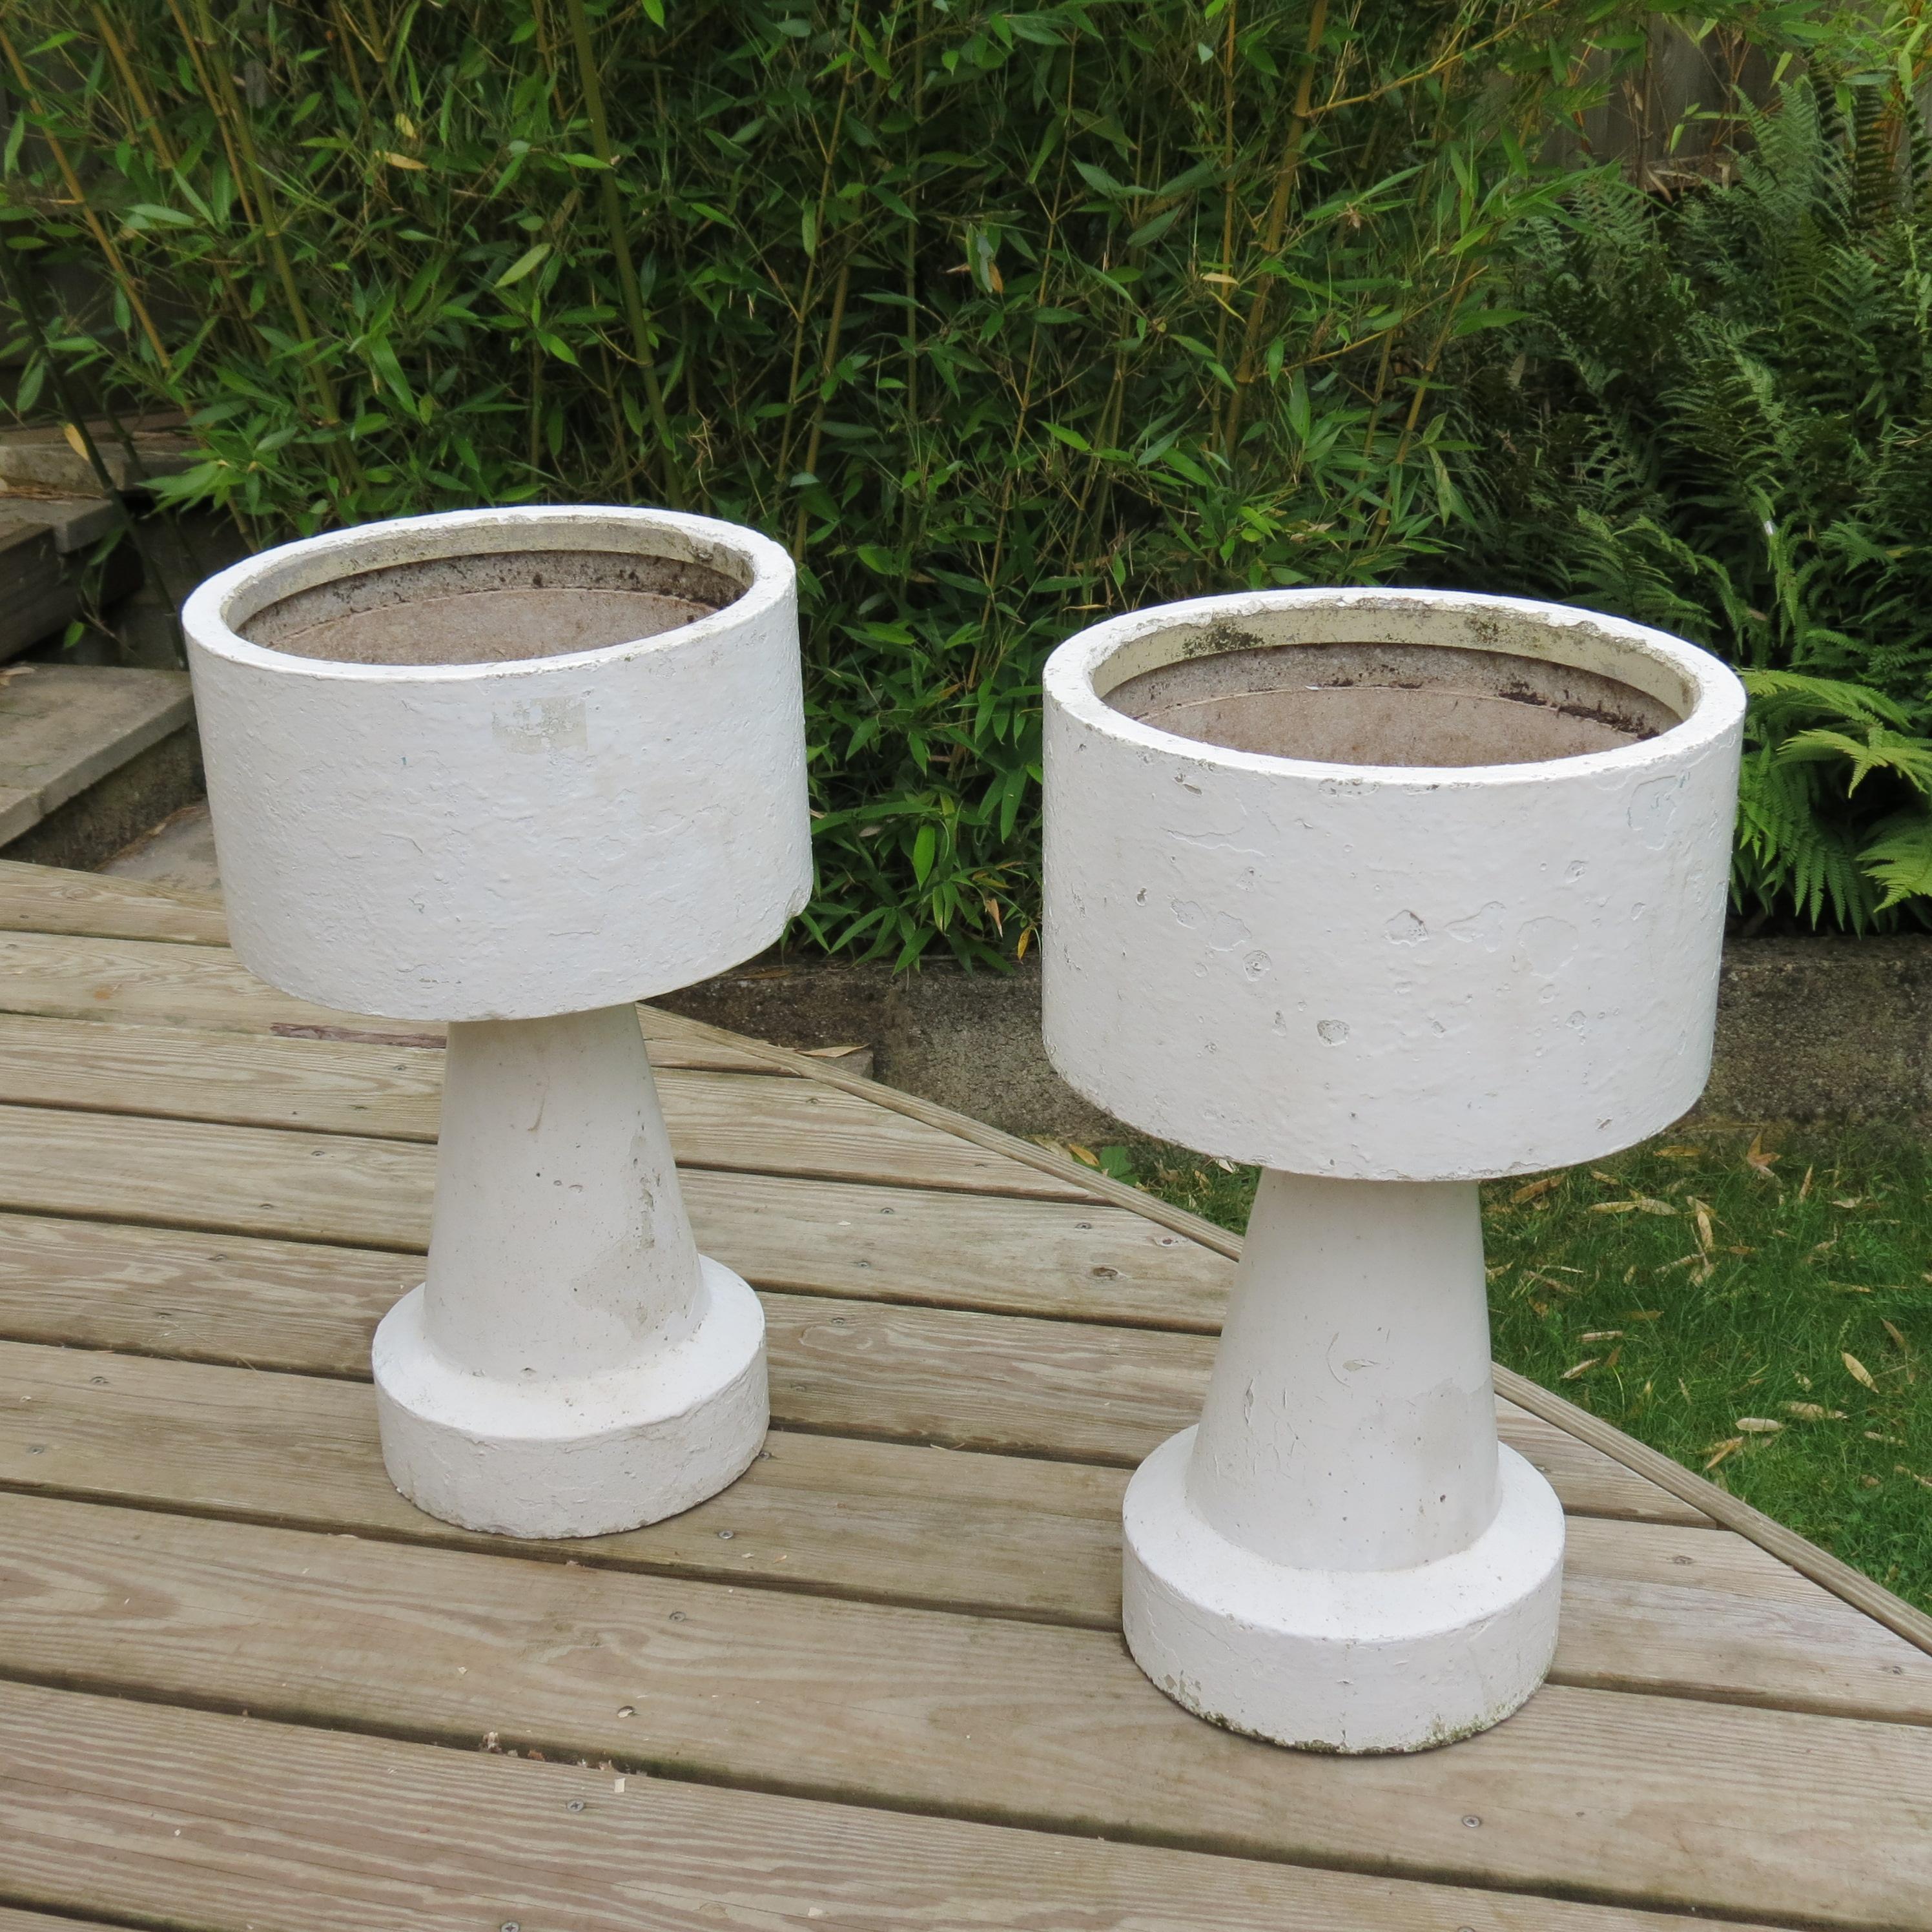 Pair of Brutalist style concrete planters from the 1970s. Made from concrete, painted white, they have been overpainted many times over the years to give a great layered effect. In good solid condition with patination to the finish. The planter bowl